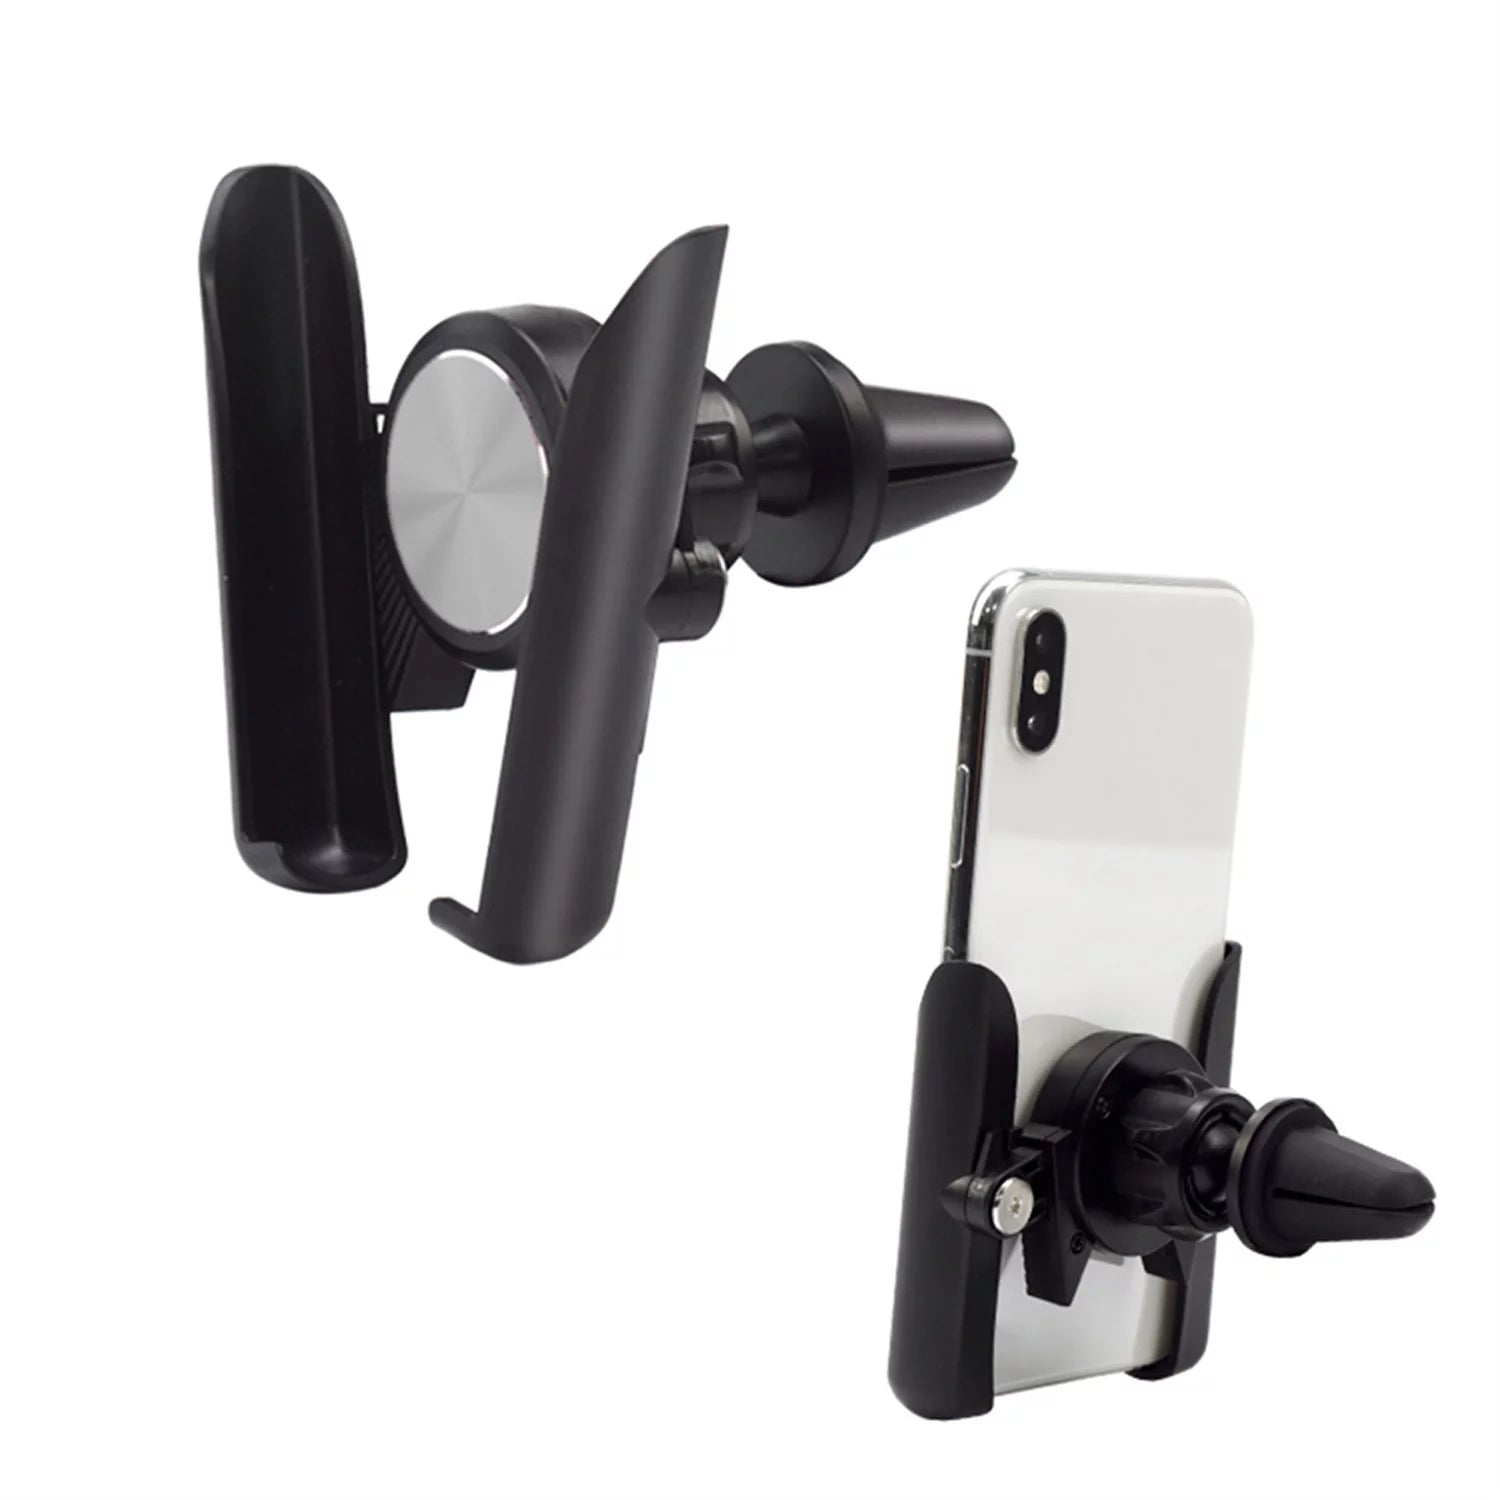 Skonyon Hands Free Car Cell Phone Holder with Stronger Vent Clip - Easily Place